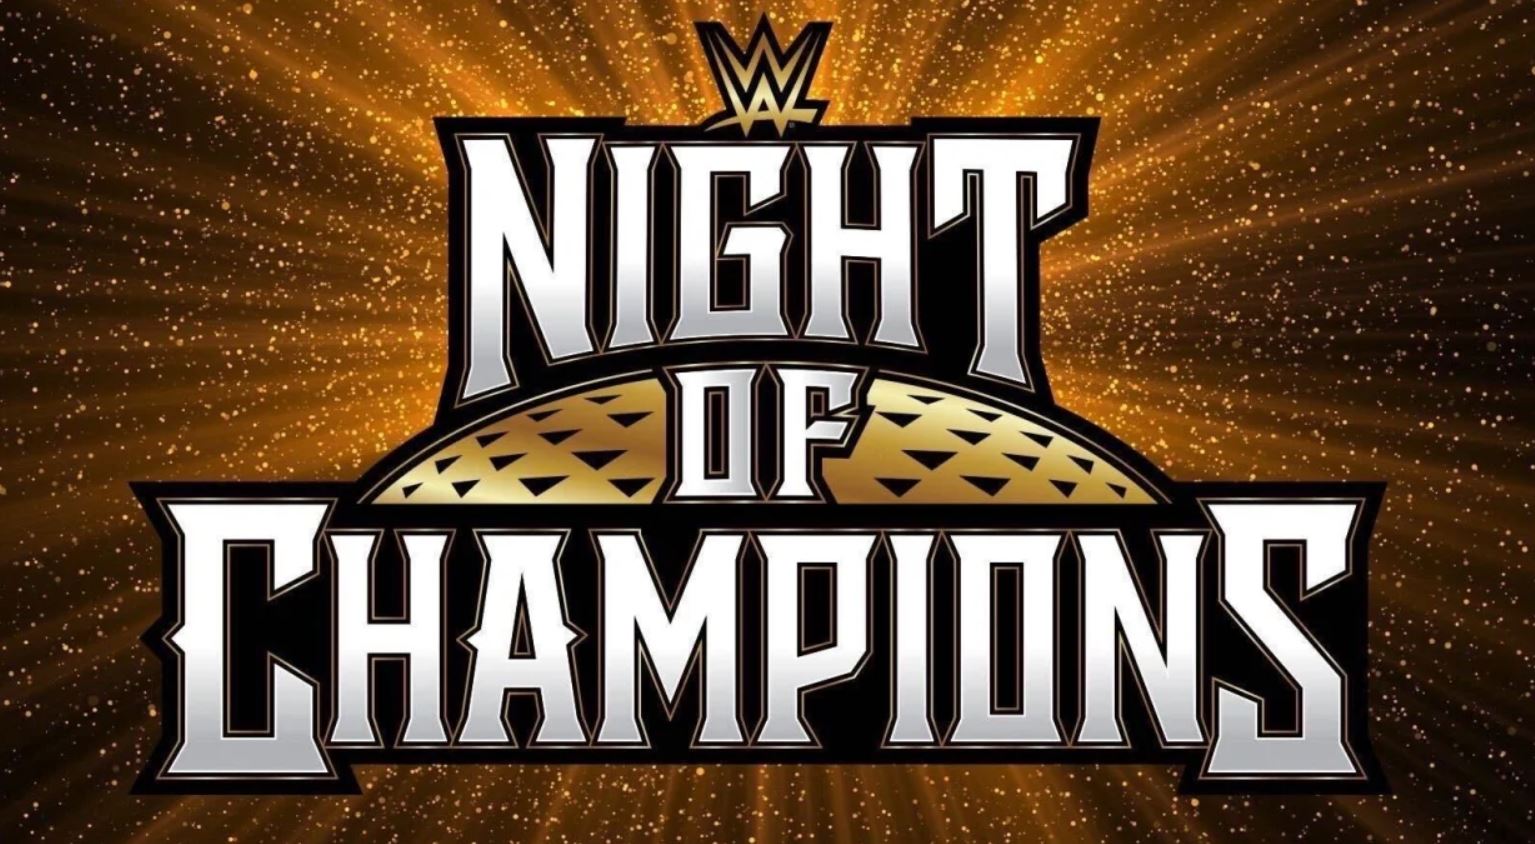 WWE Night of Champions Main Event for New World Heavyweight Title